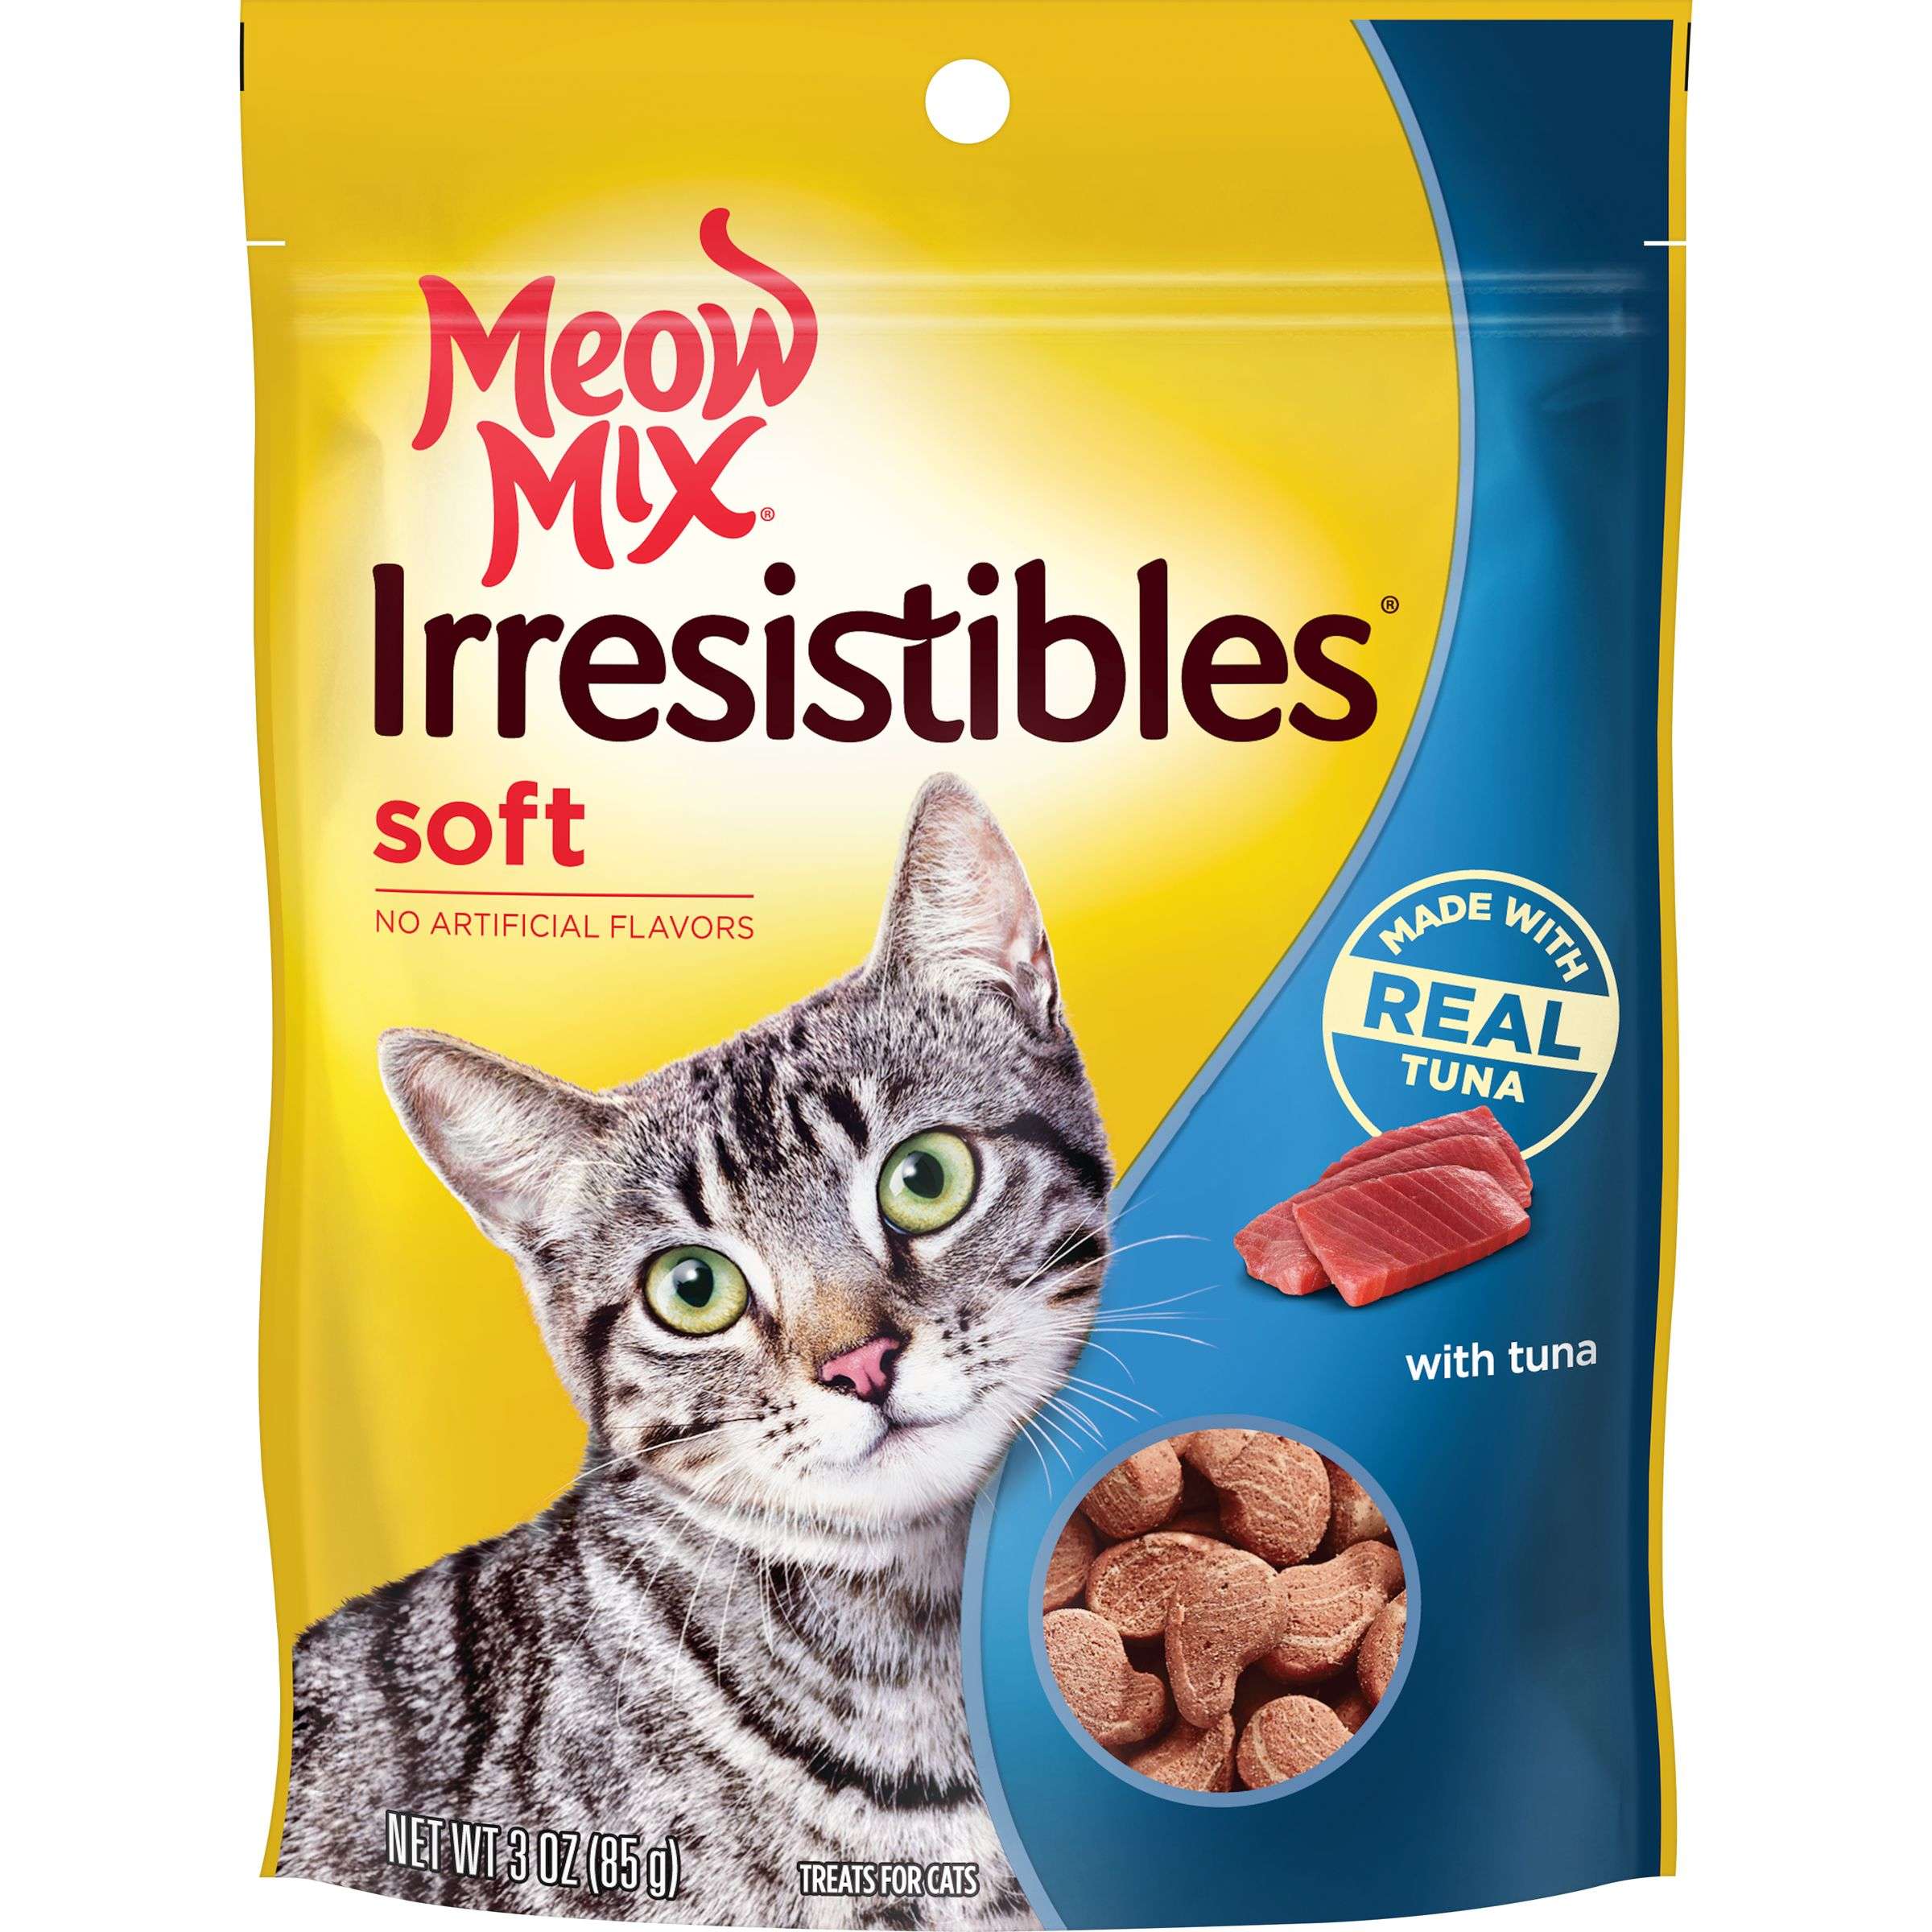 Meow Mix Irresistibles Cat Treats, Soft With Tuna, 3